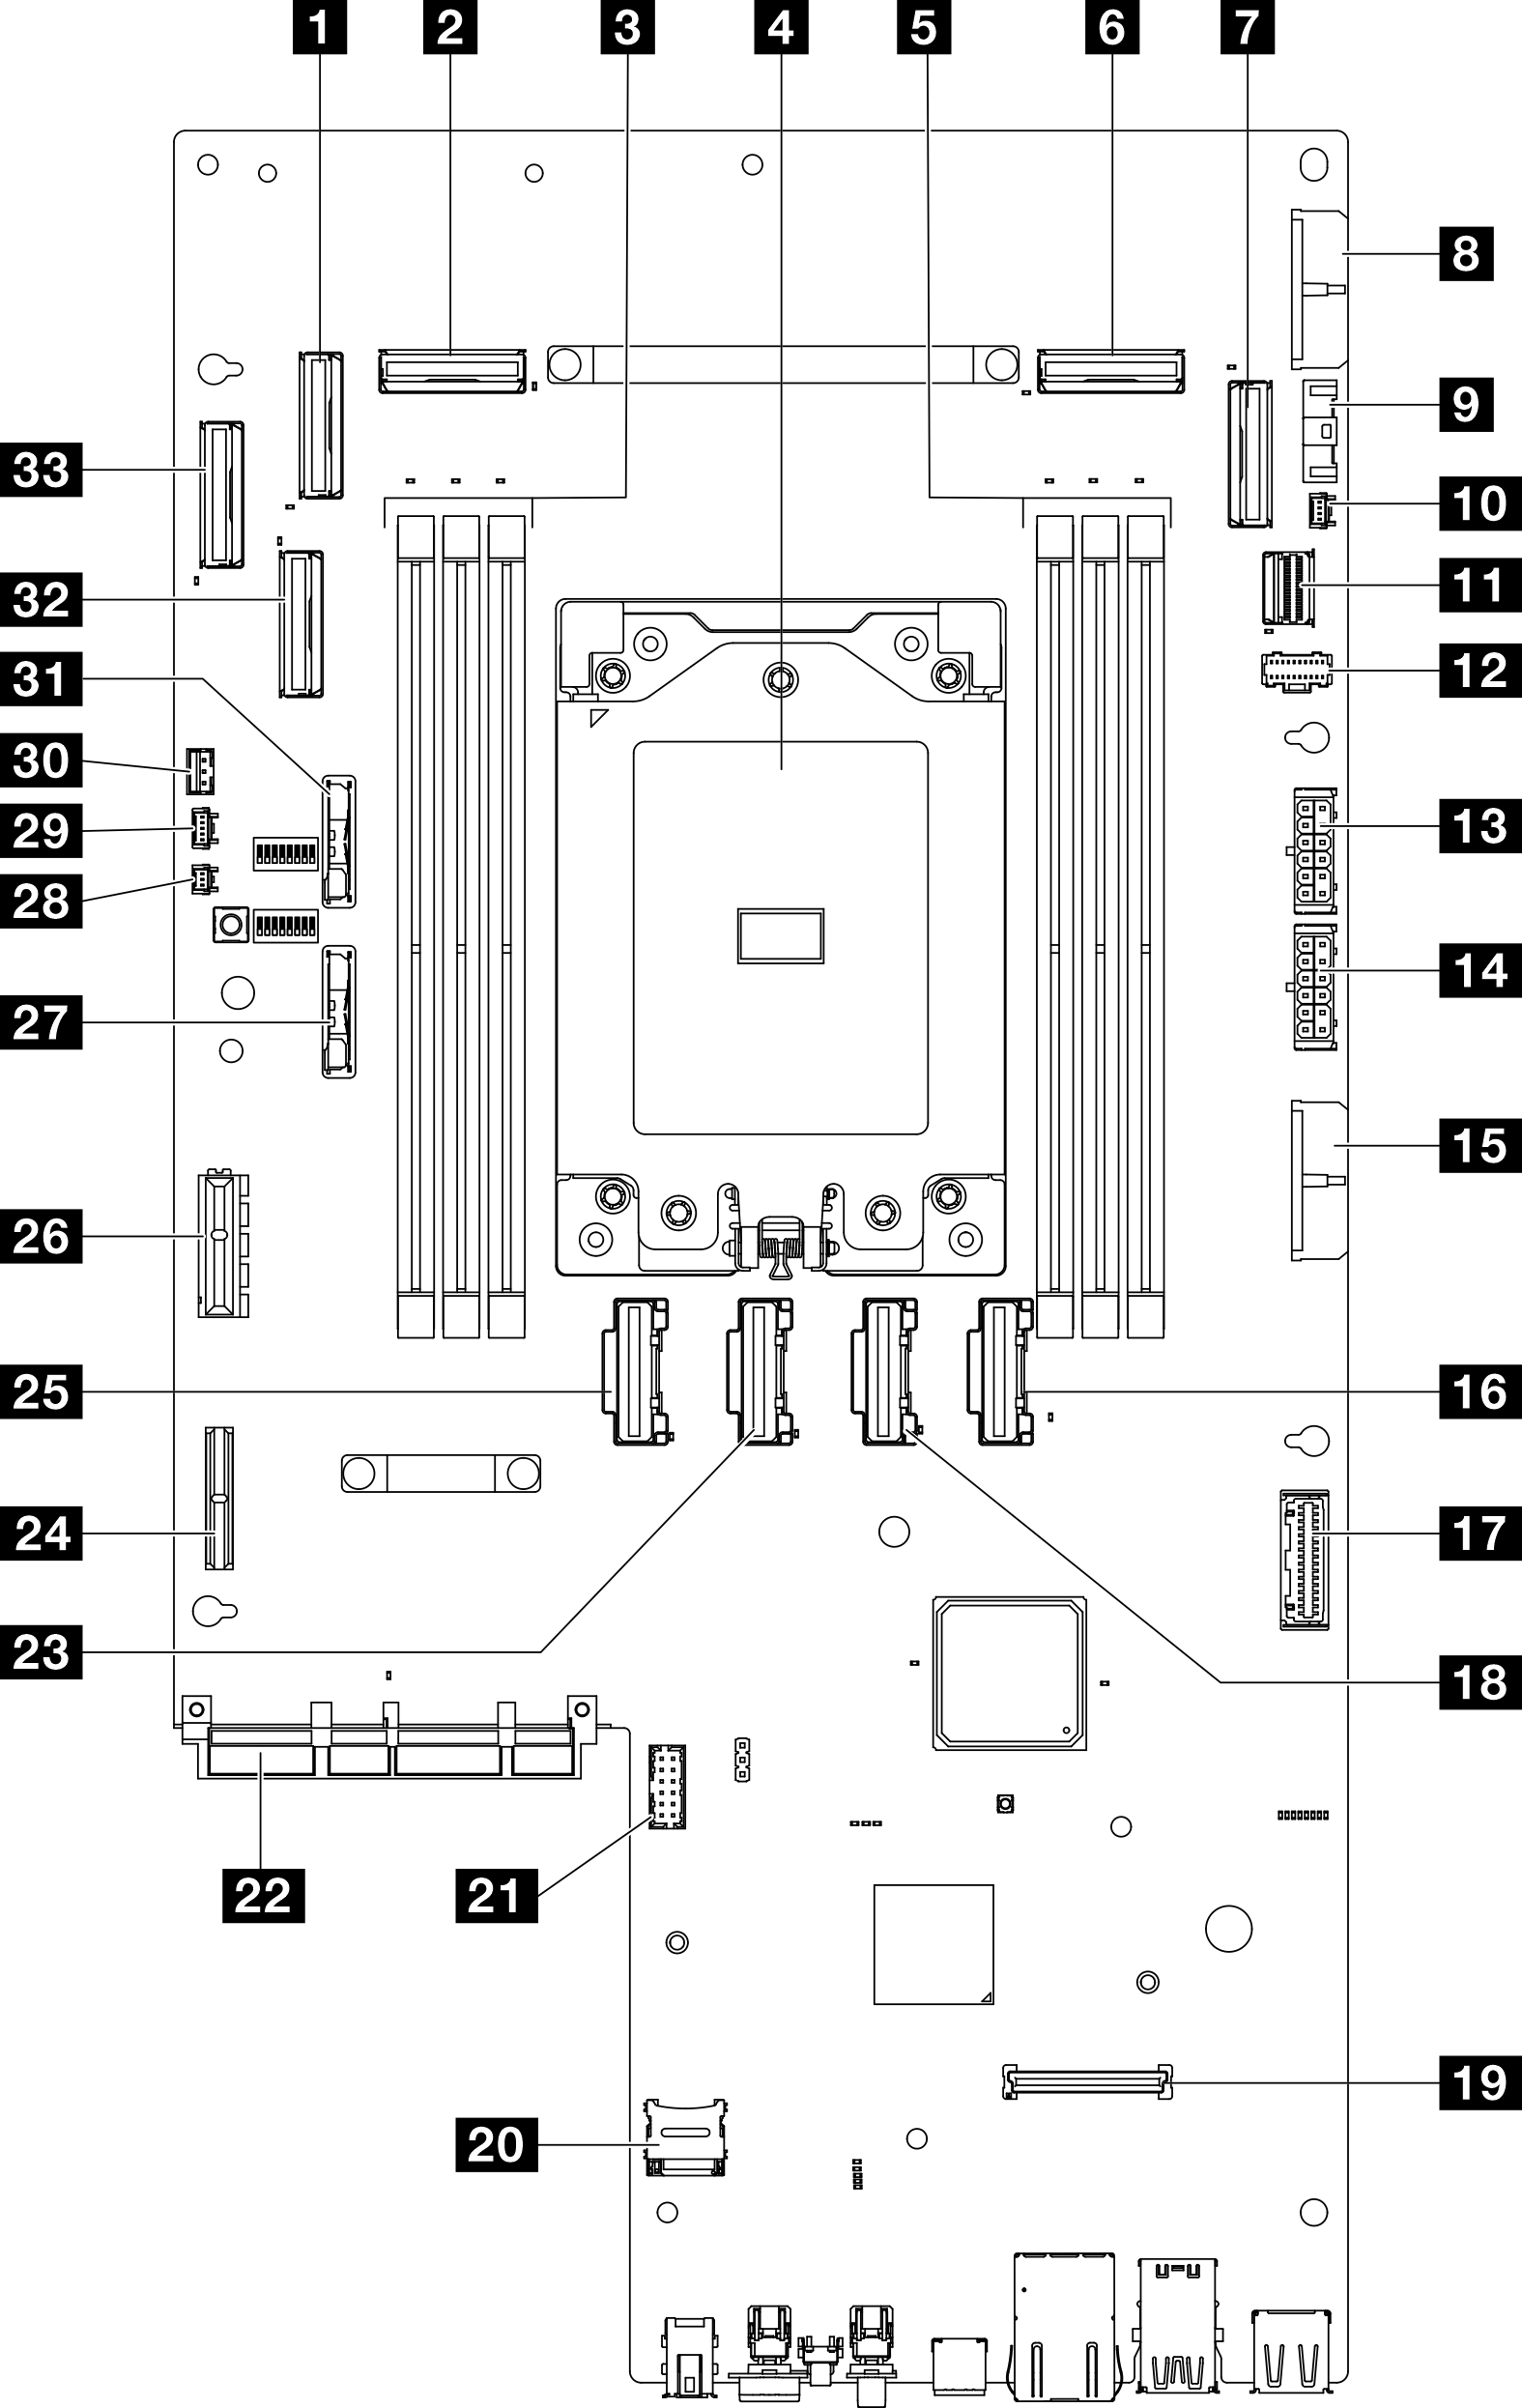 System-board connectors